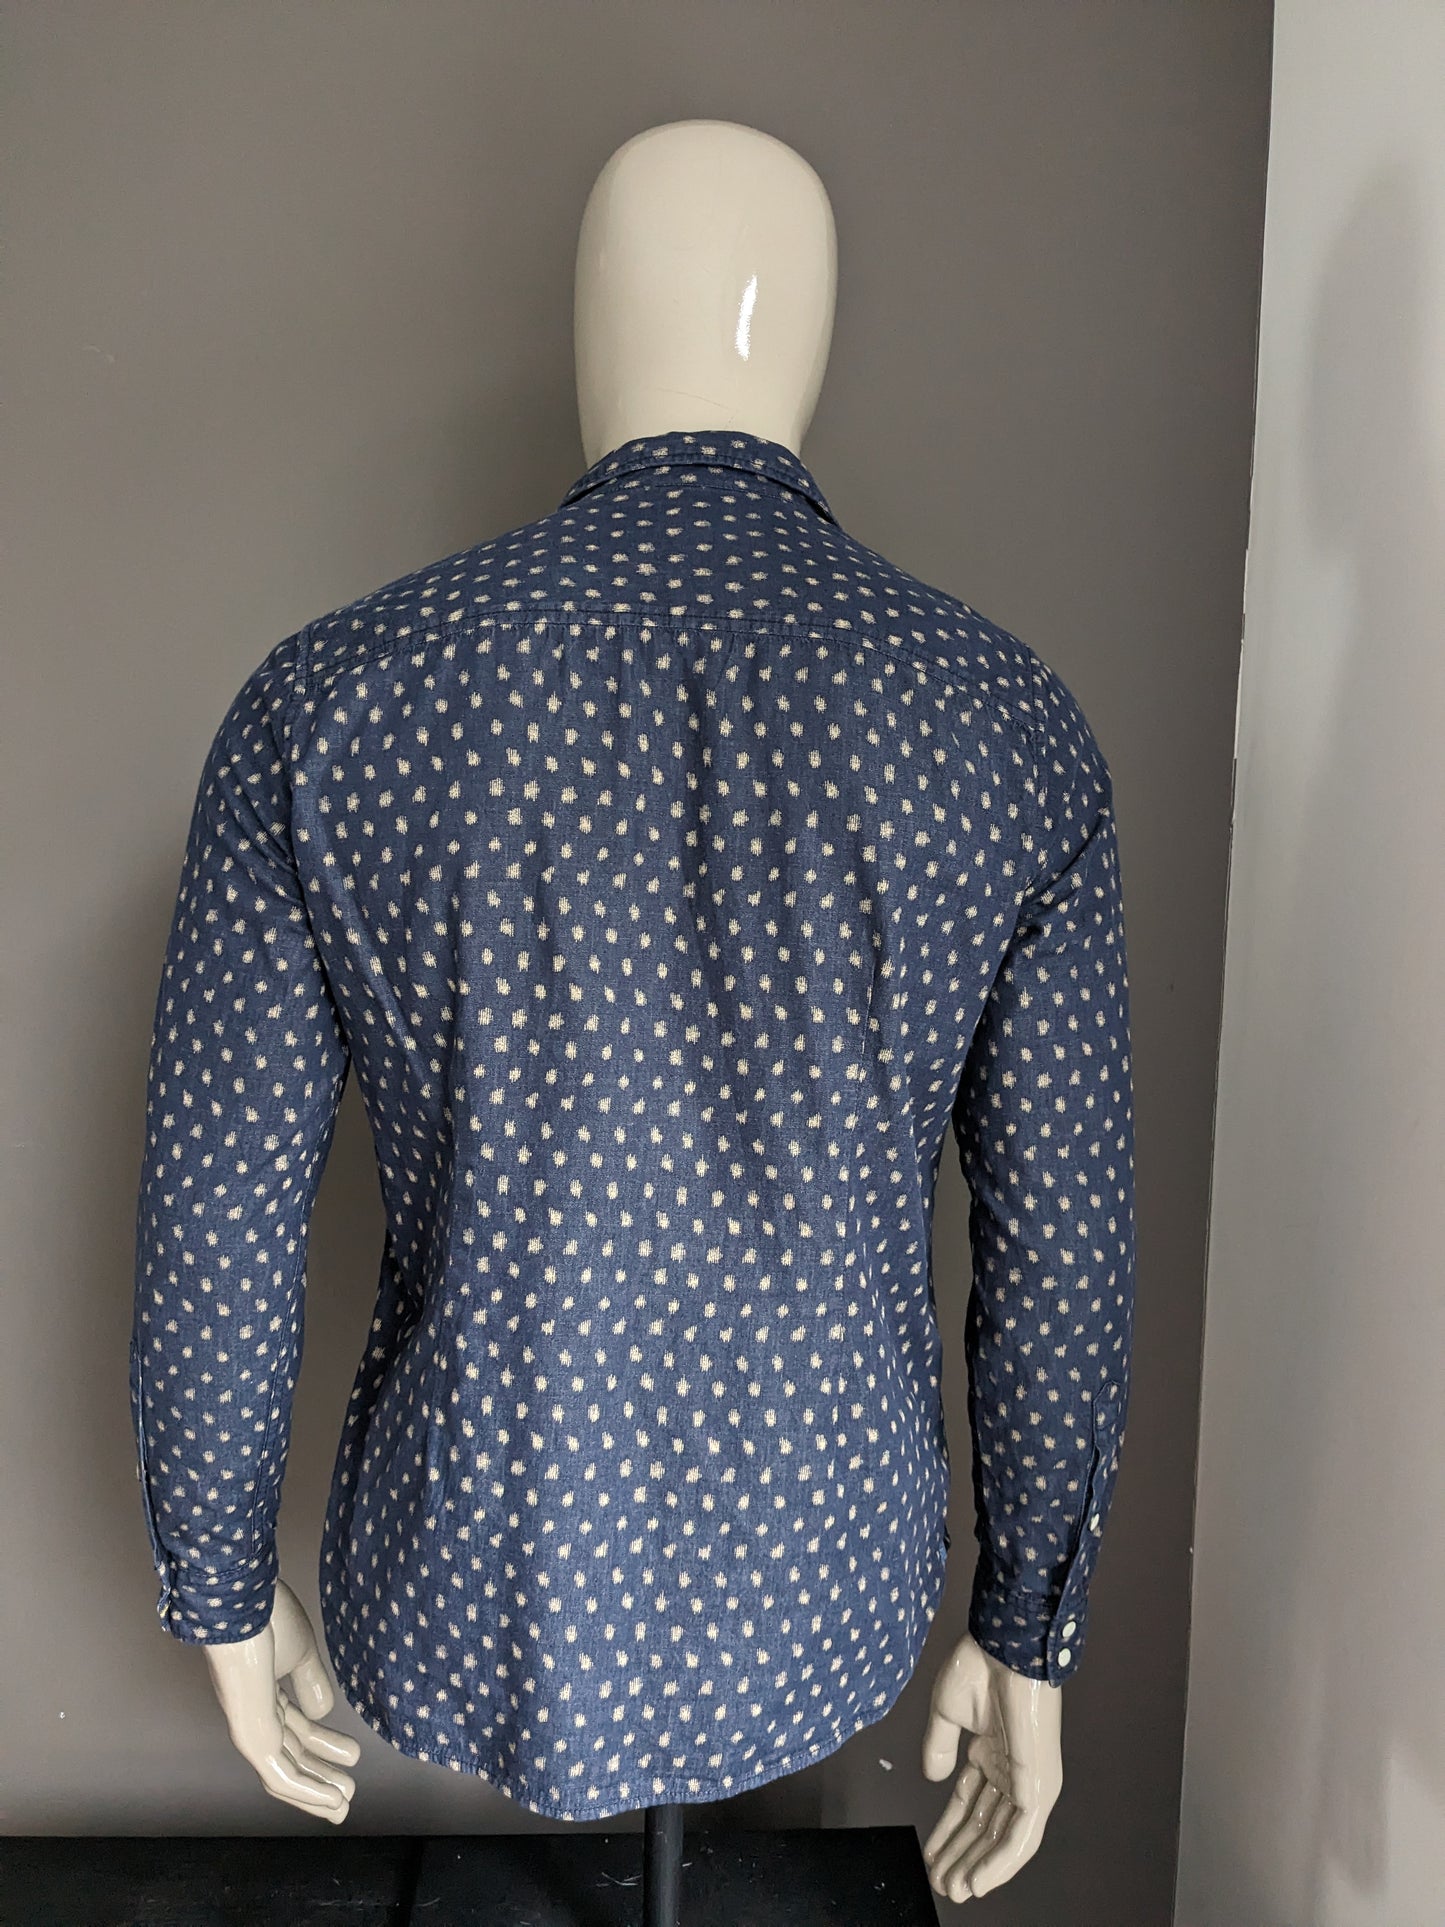 s.Oliver shirt with press studs. Blue gray print. Size M. Slim